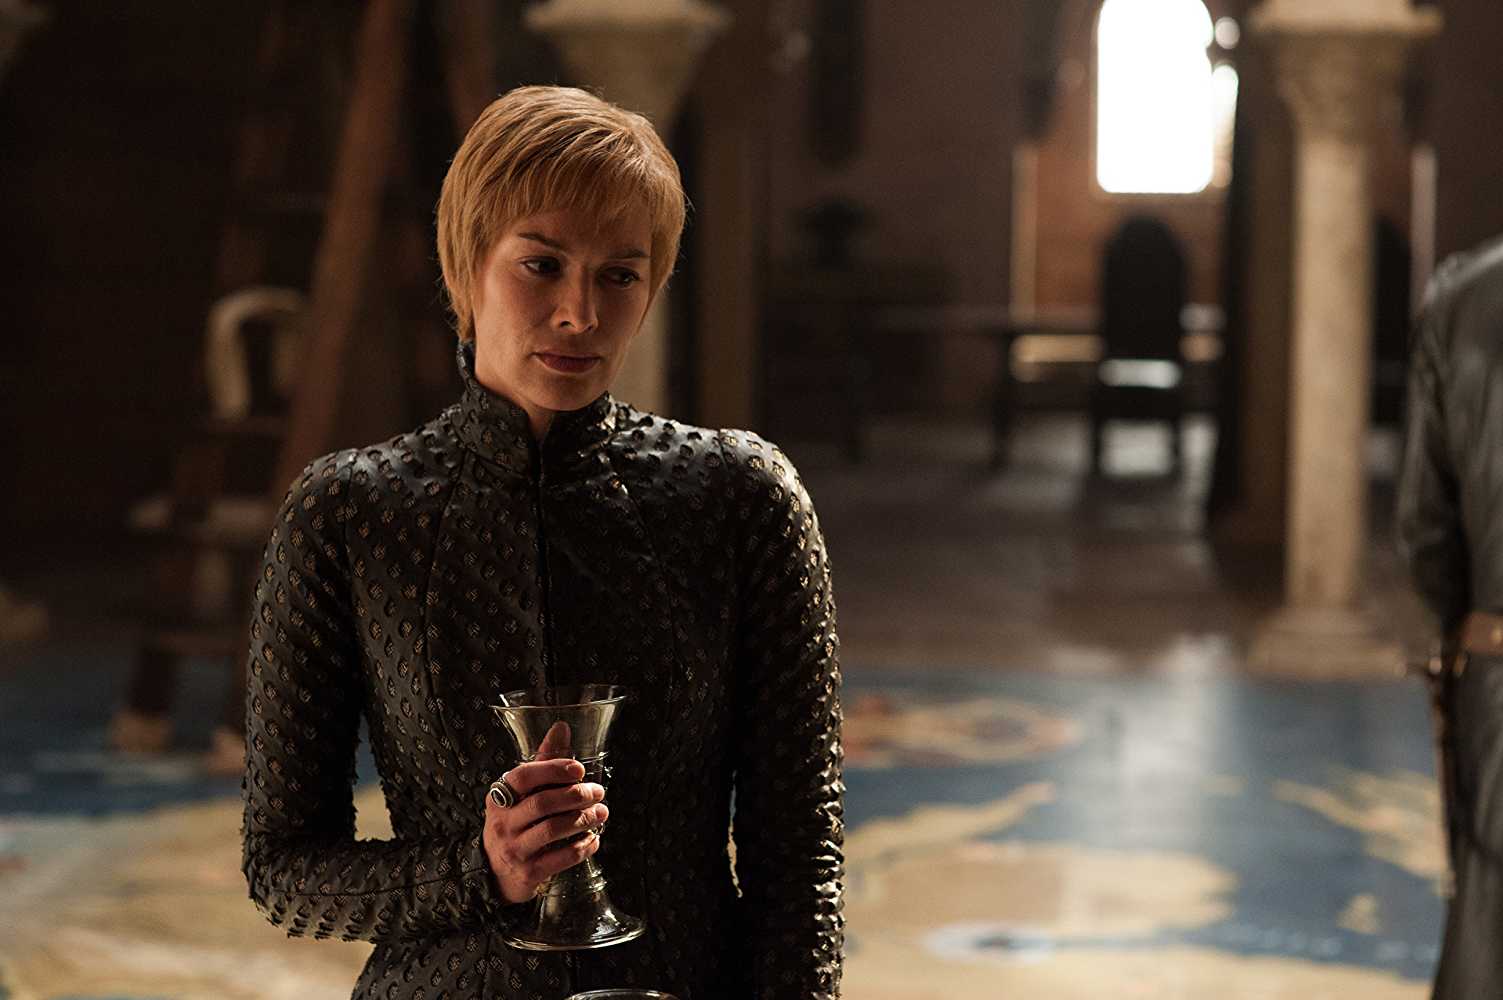 Lena Headey as Cersei Lannister in 'Game of Thrones'.
(Source: IMDB)